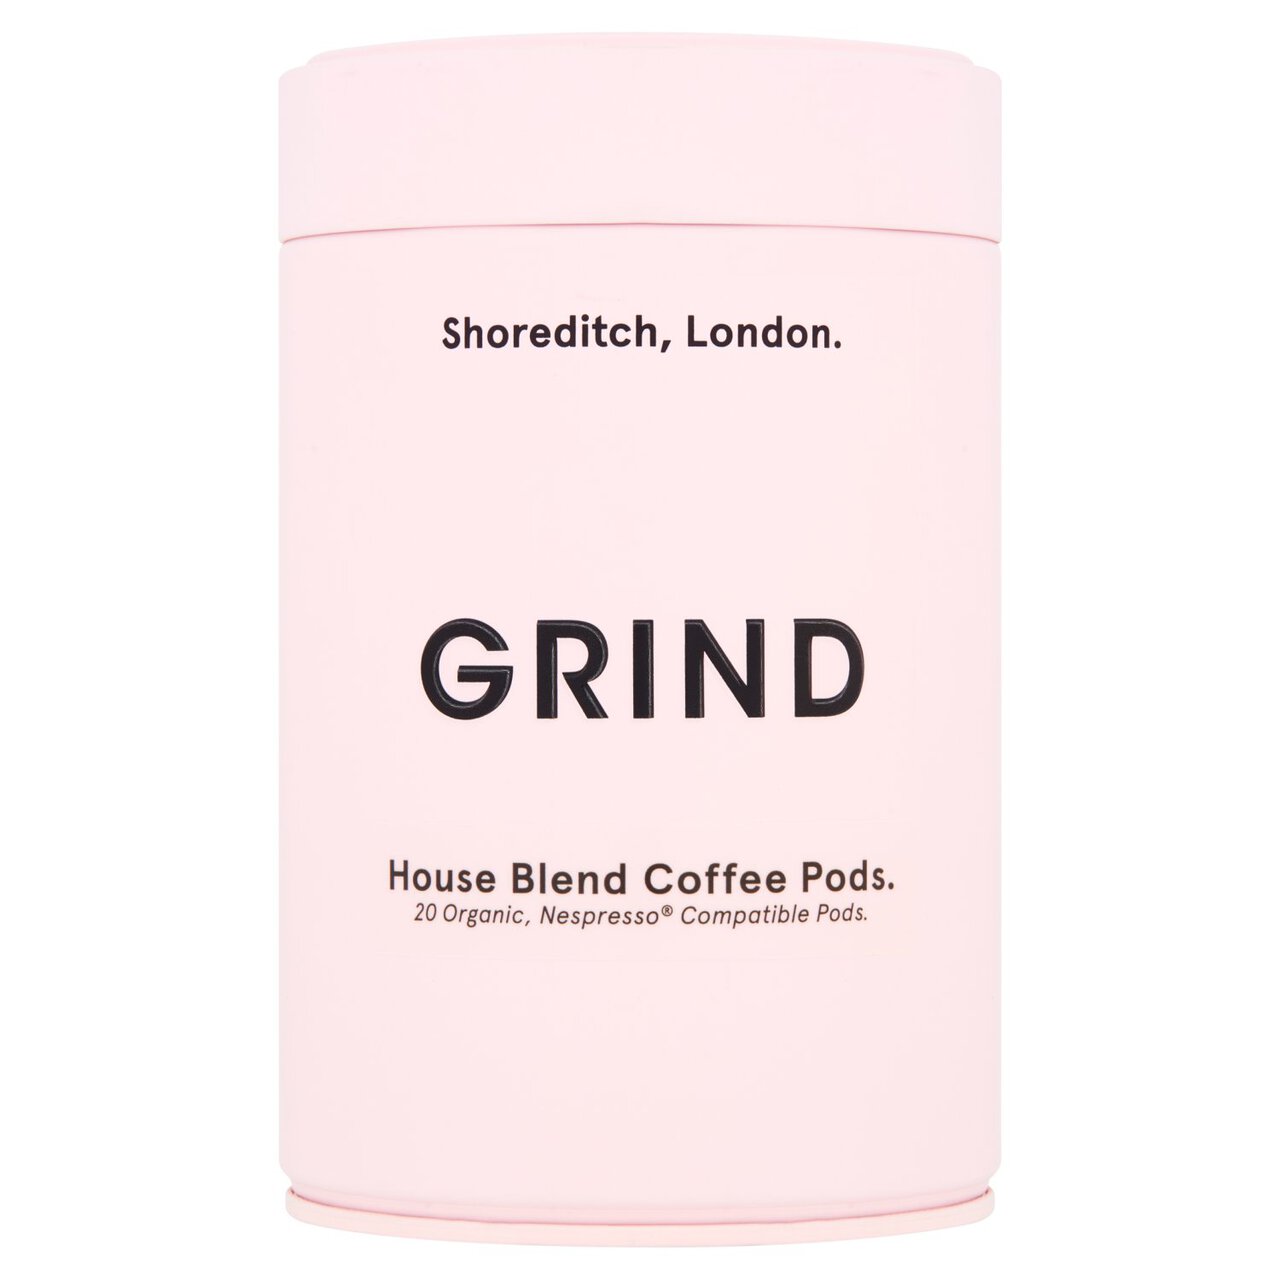 Grind House Blend Compostable Coffee Pods Tin 20 per pack